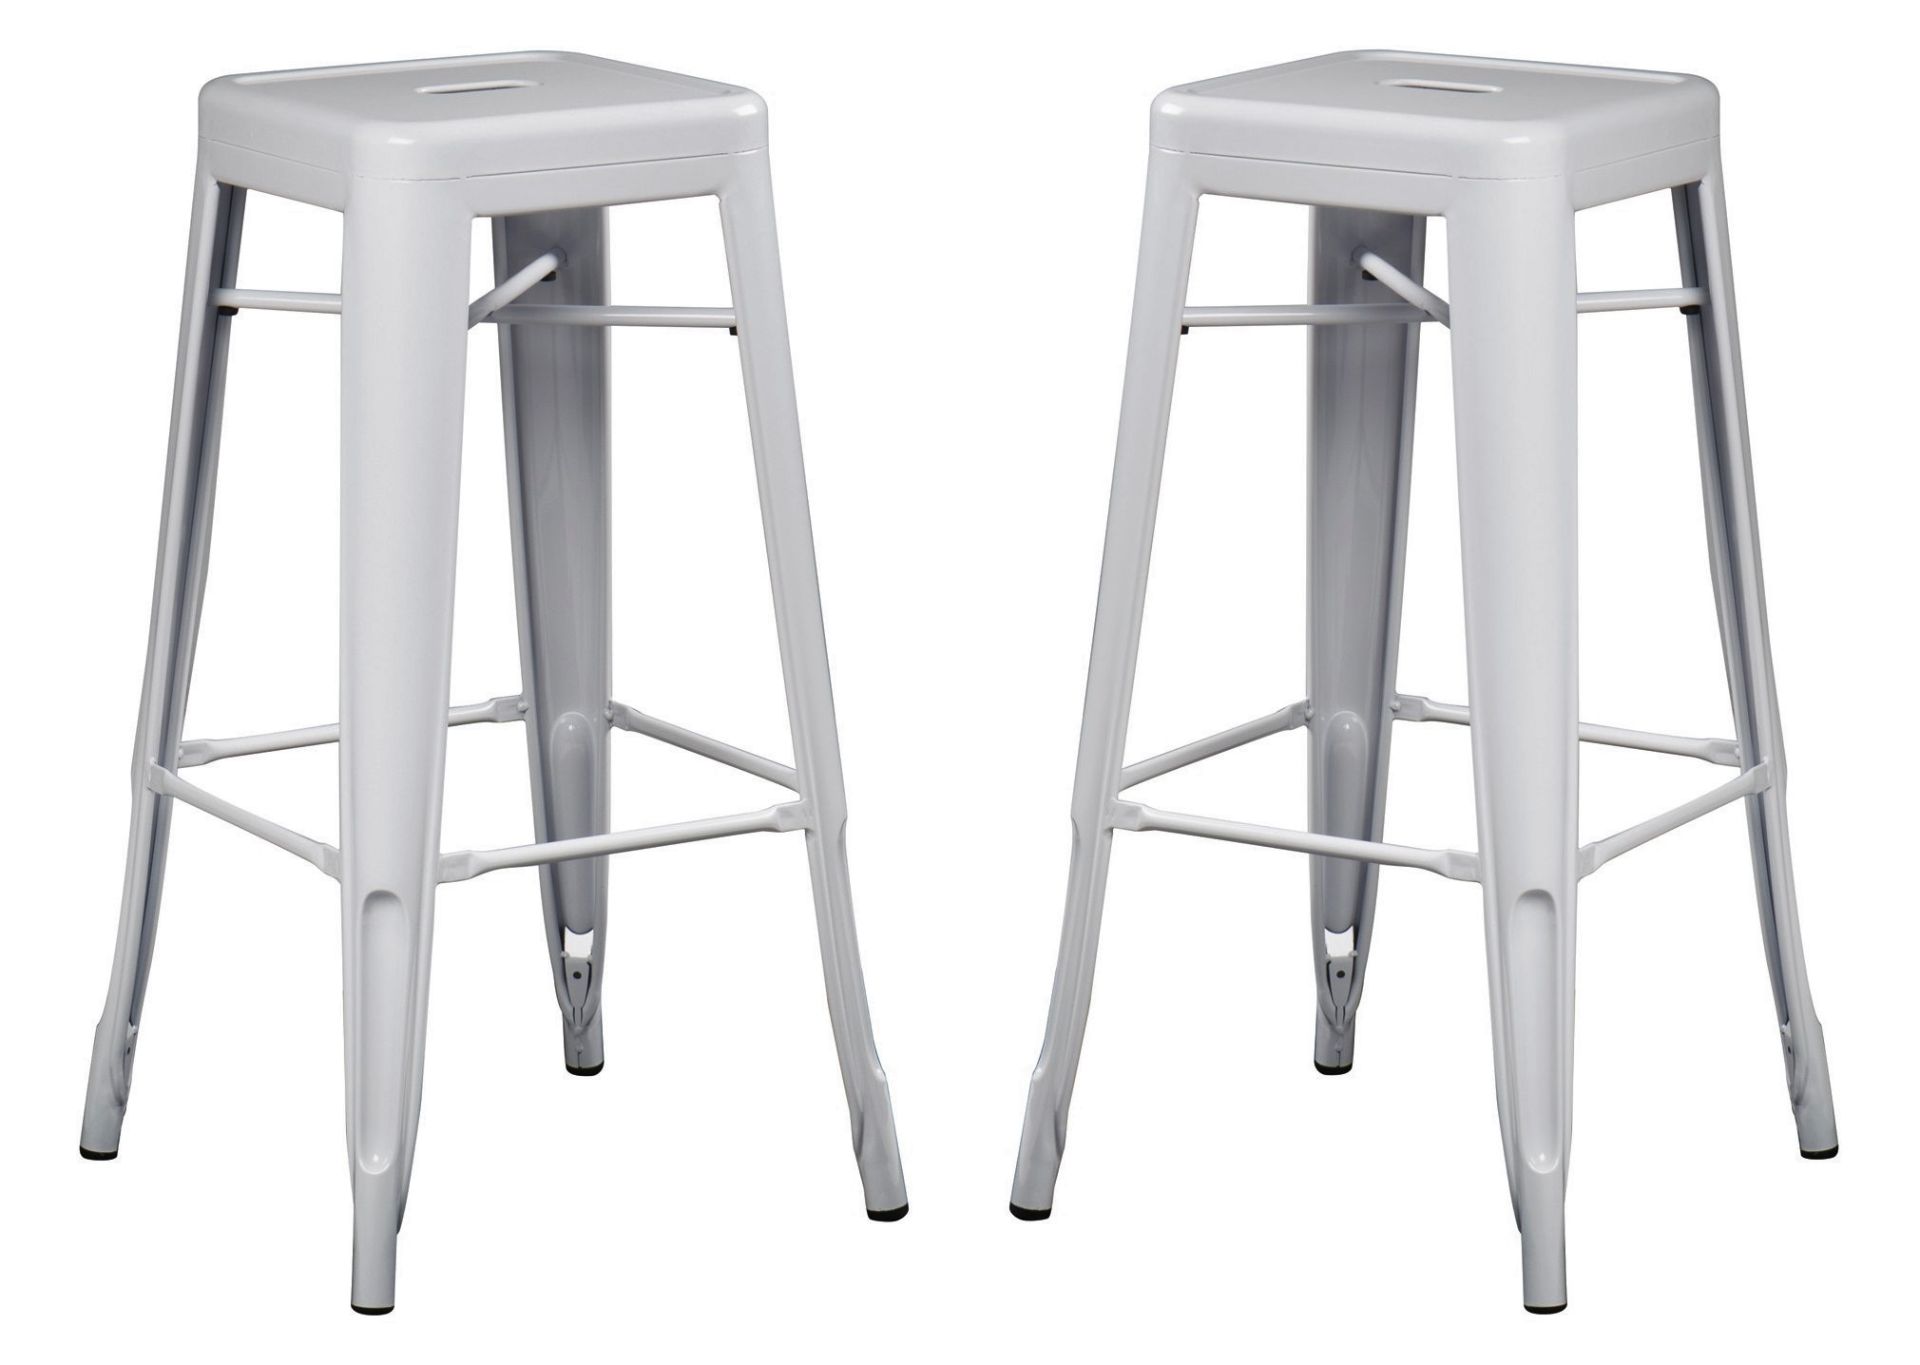 2 x Xavier Pauchard Inspired Industrial White Bar Stools - Pair of - Lightweight and Stackable -